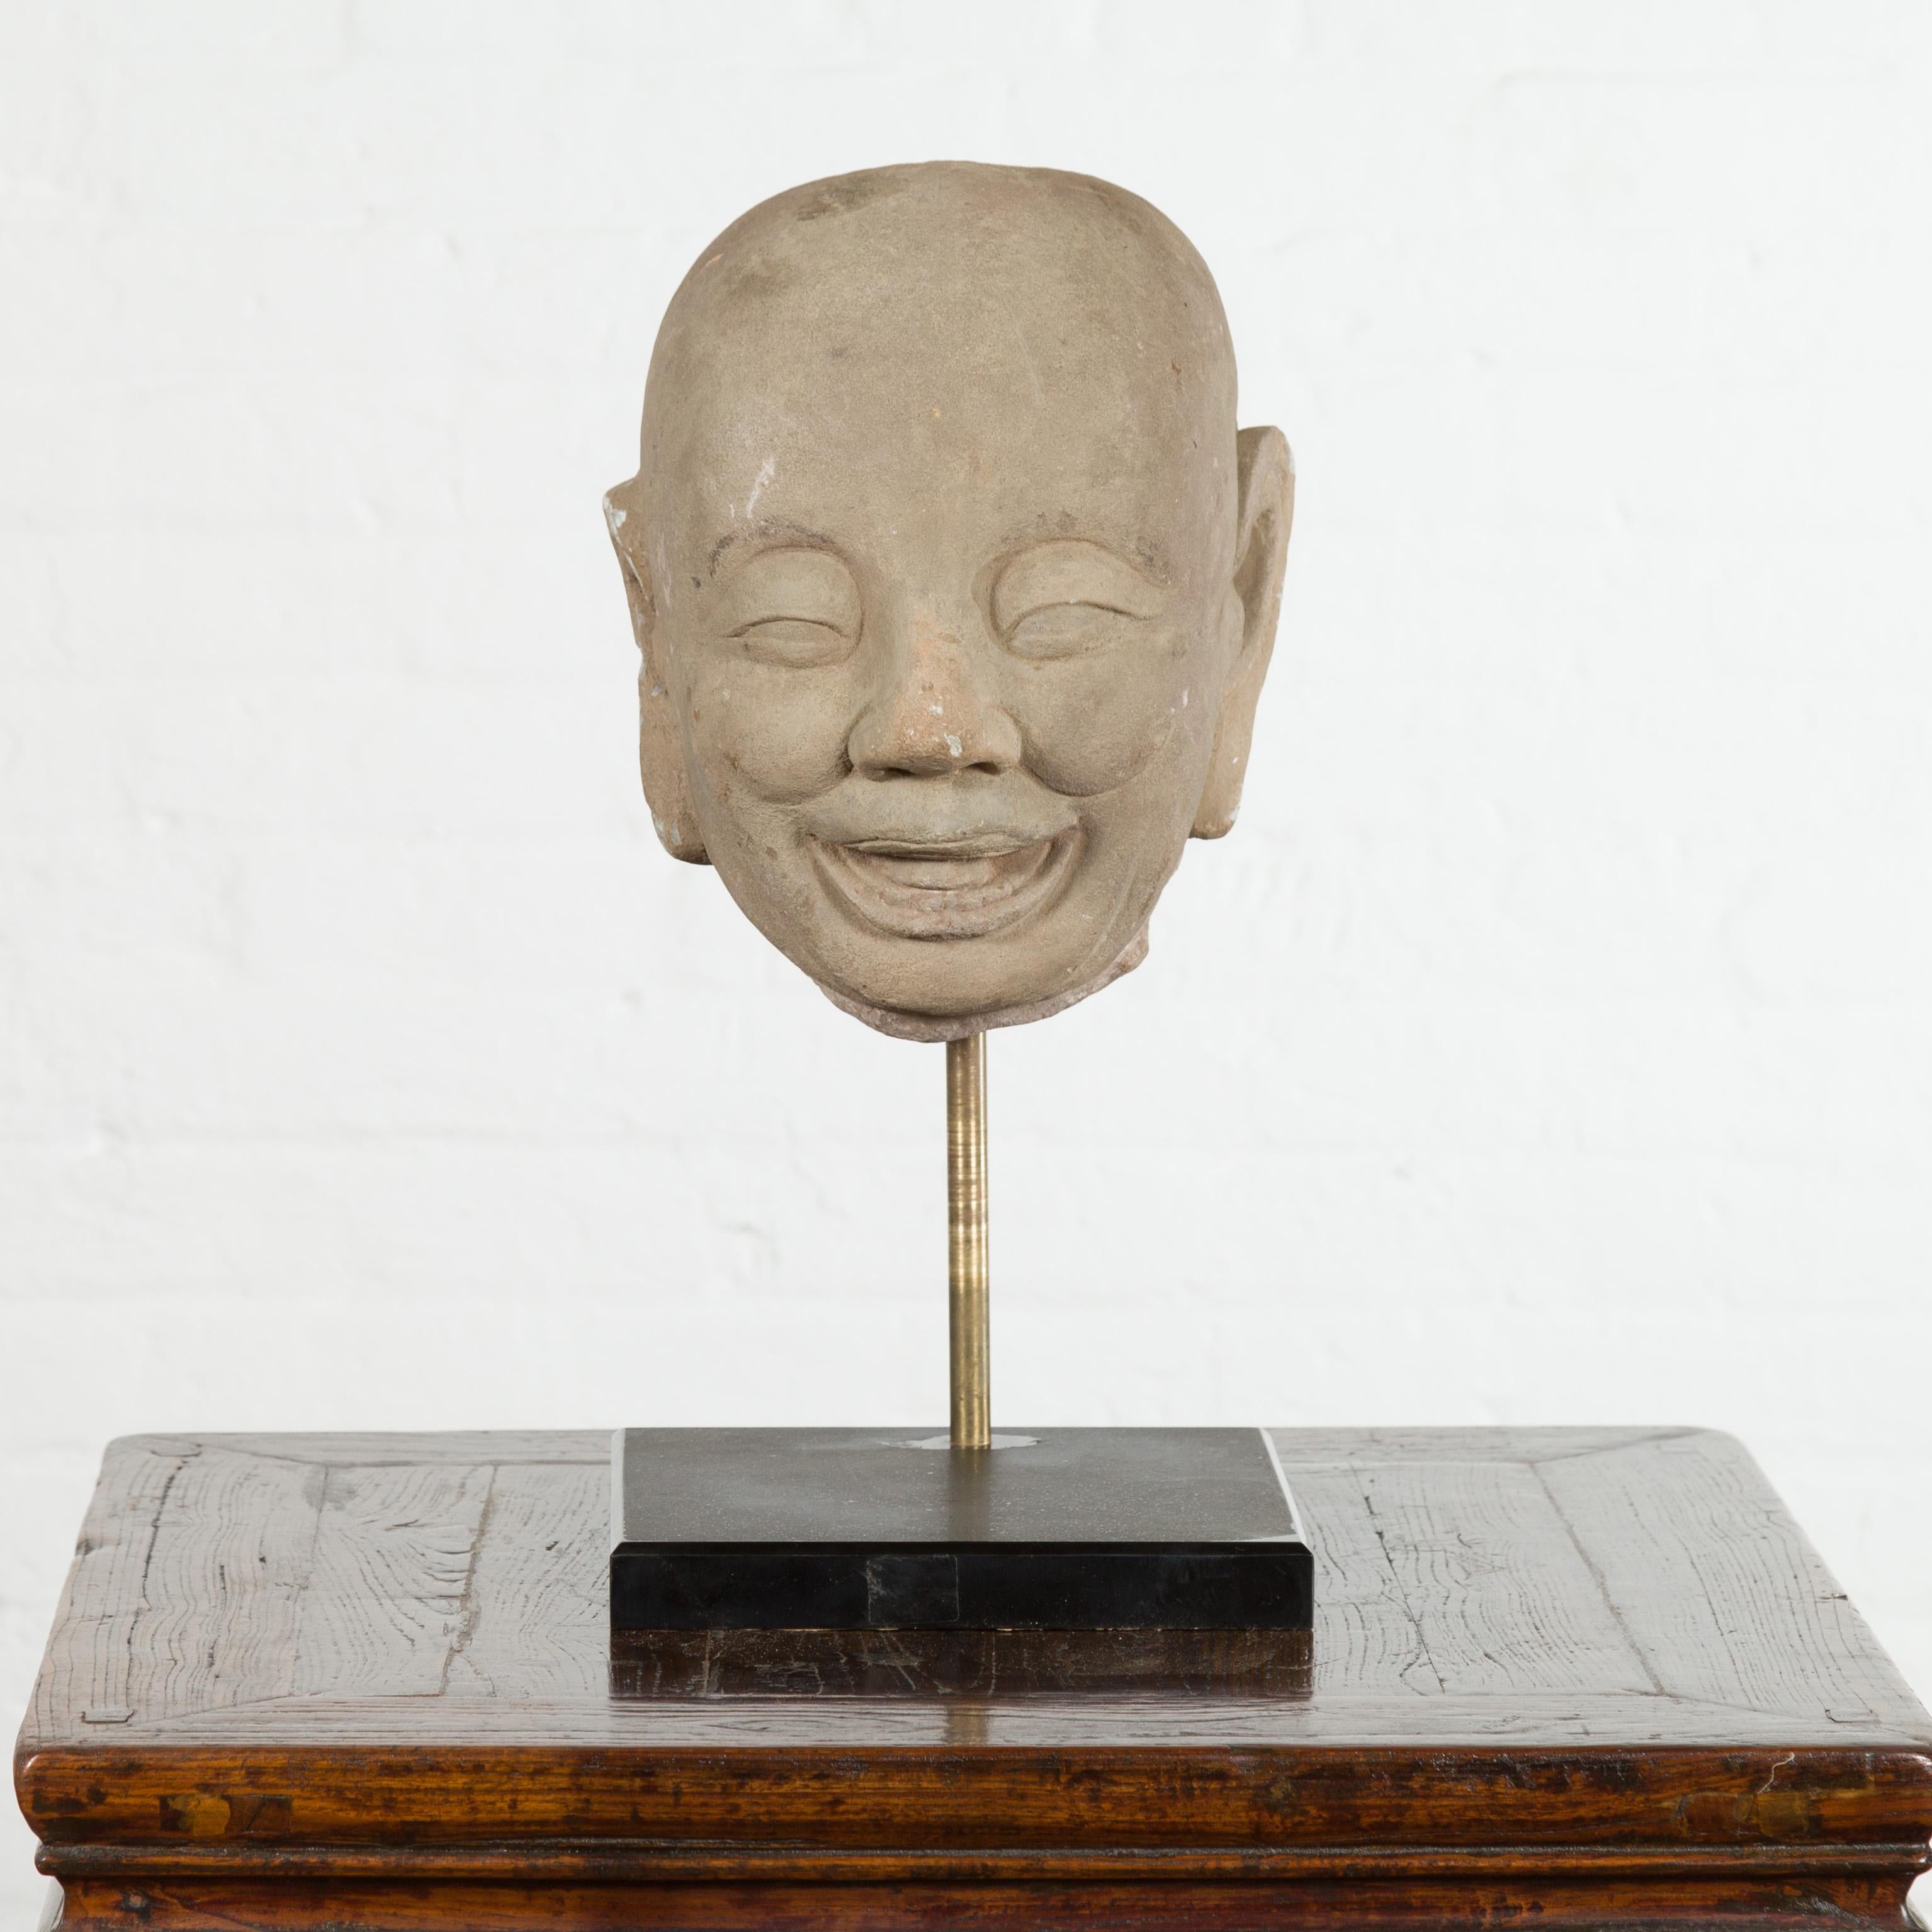 18th Century and Earlier Chinese Song Dynasty Hand-Carved Limestone Head of a Lohan circa 960 to 1279 AD